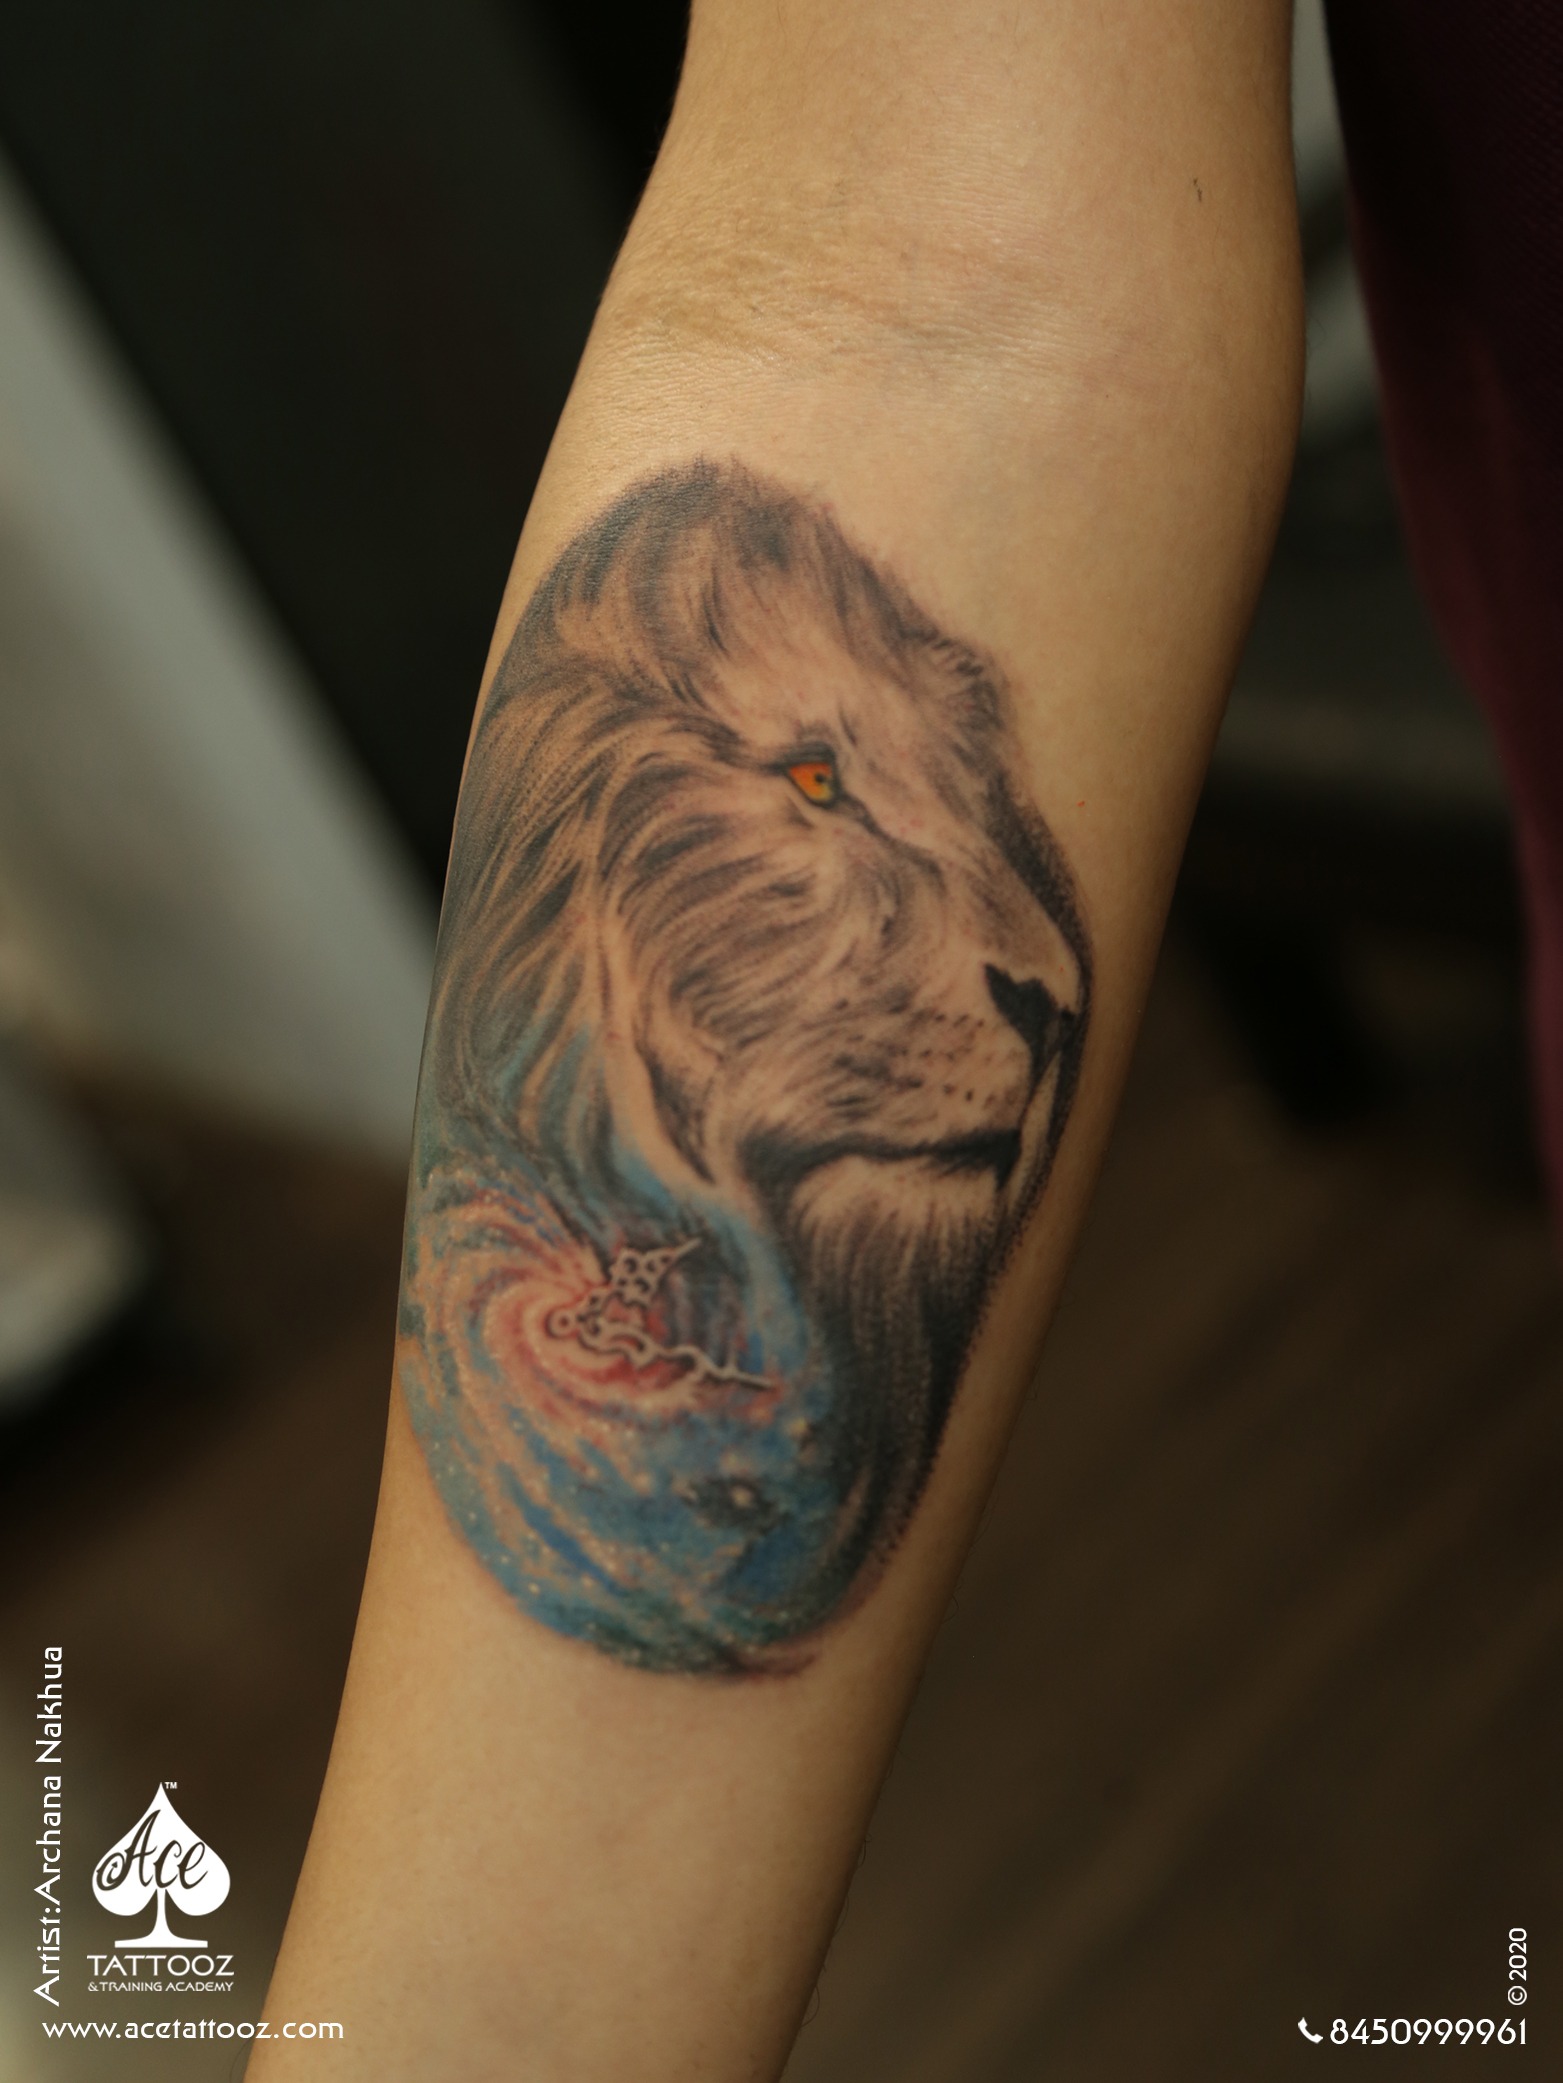 Tattoos by Cata - Color lion roaring #tattoo #tattoosbycata #dergrimm #lion  #liontattoo #color #colortattoo #realistictattoo #realistic #tattooart #art  #tattooartist #tattooed #inked #berlin | Facebook